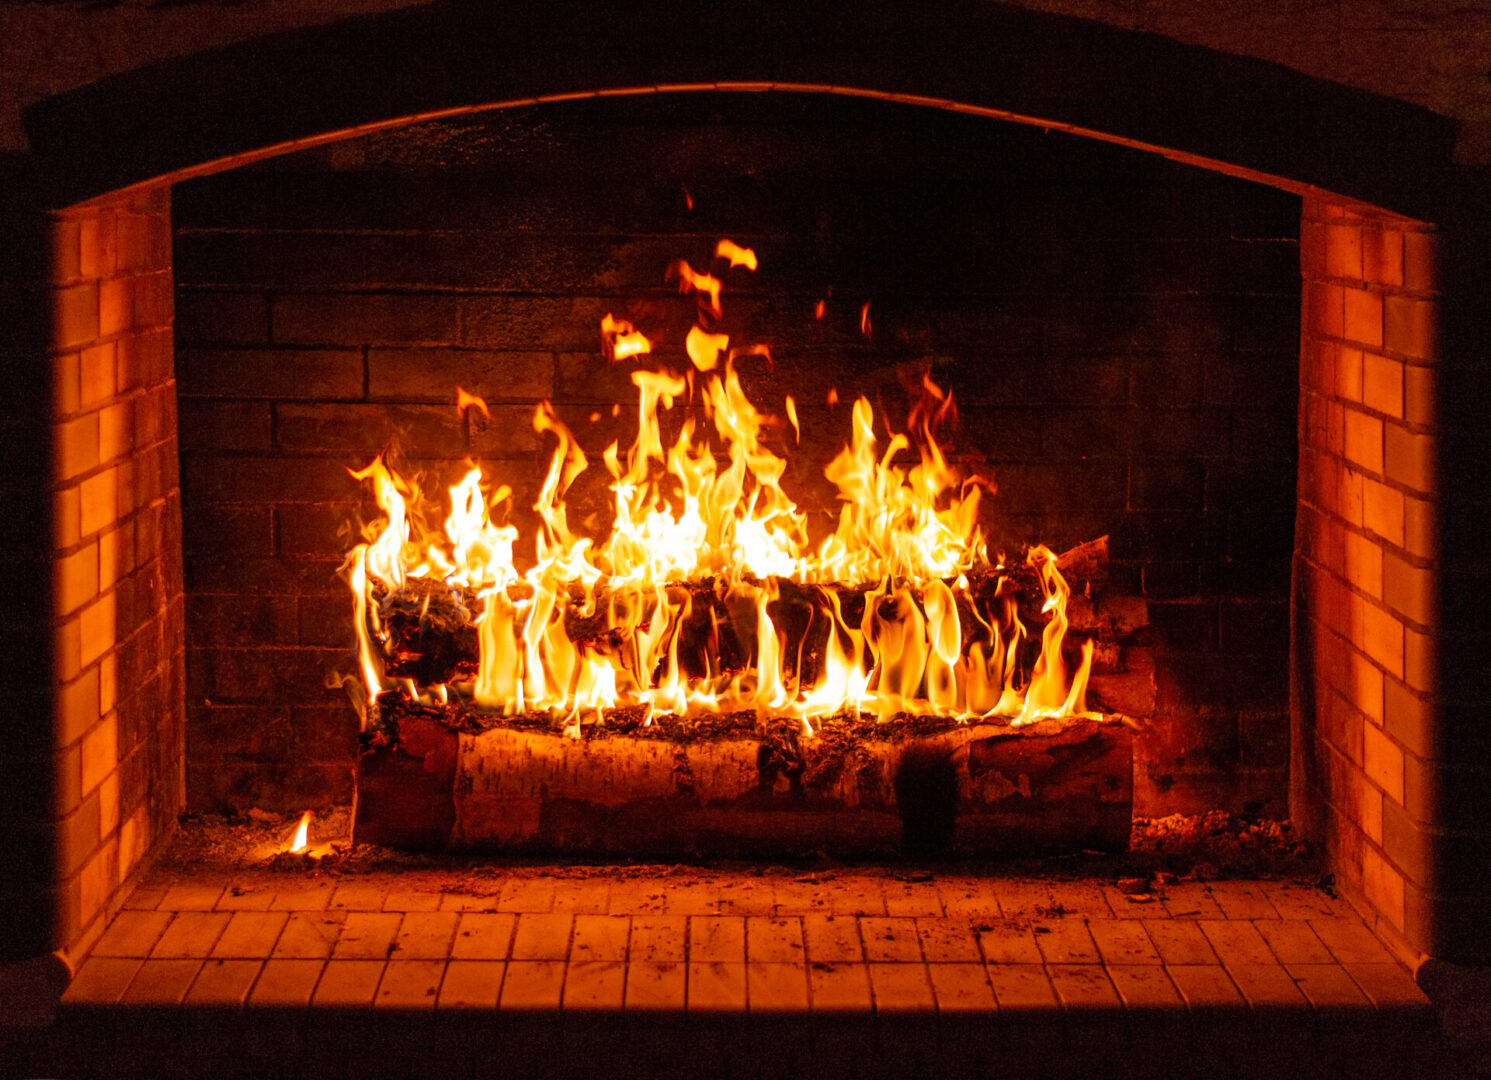 A fire burning in the fireplace with red and yellow flames.